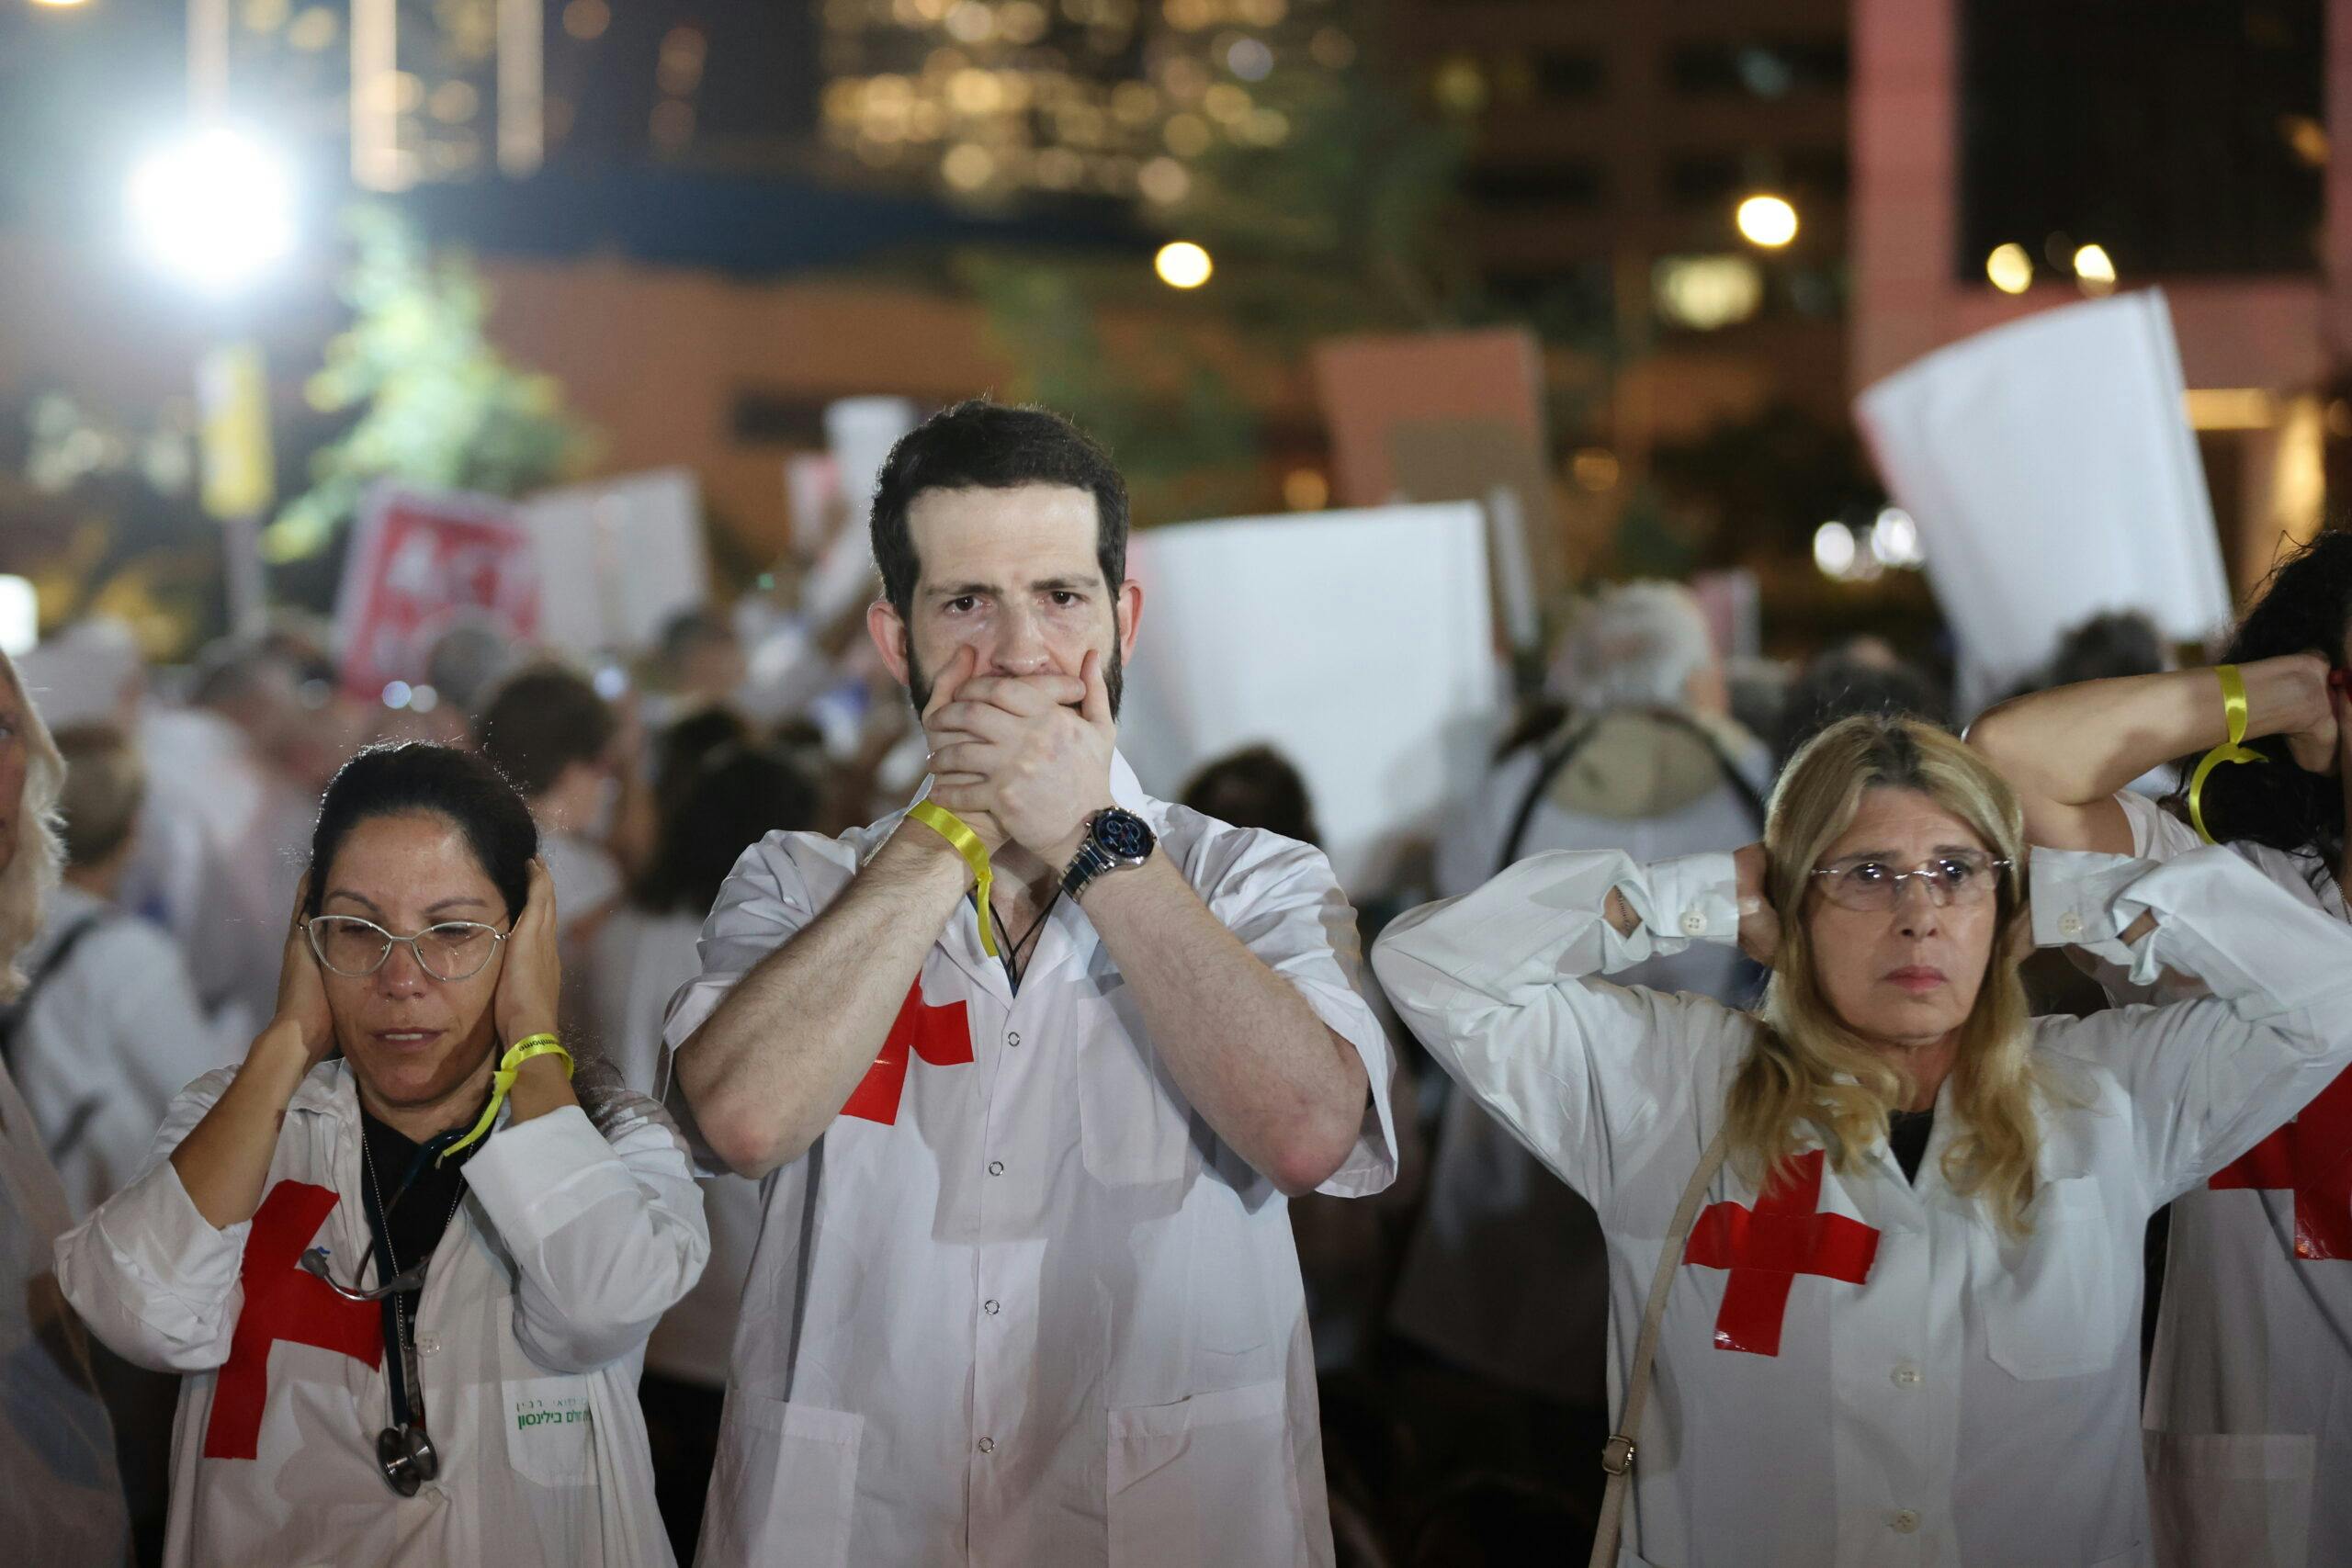 3 people in white coats with red crosses on them, one with hands over mouth, one with hands over ears, one with hands over eyes.